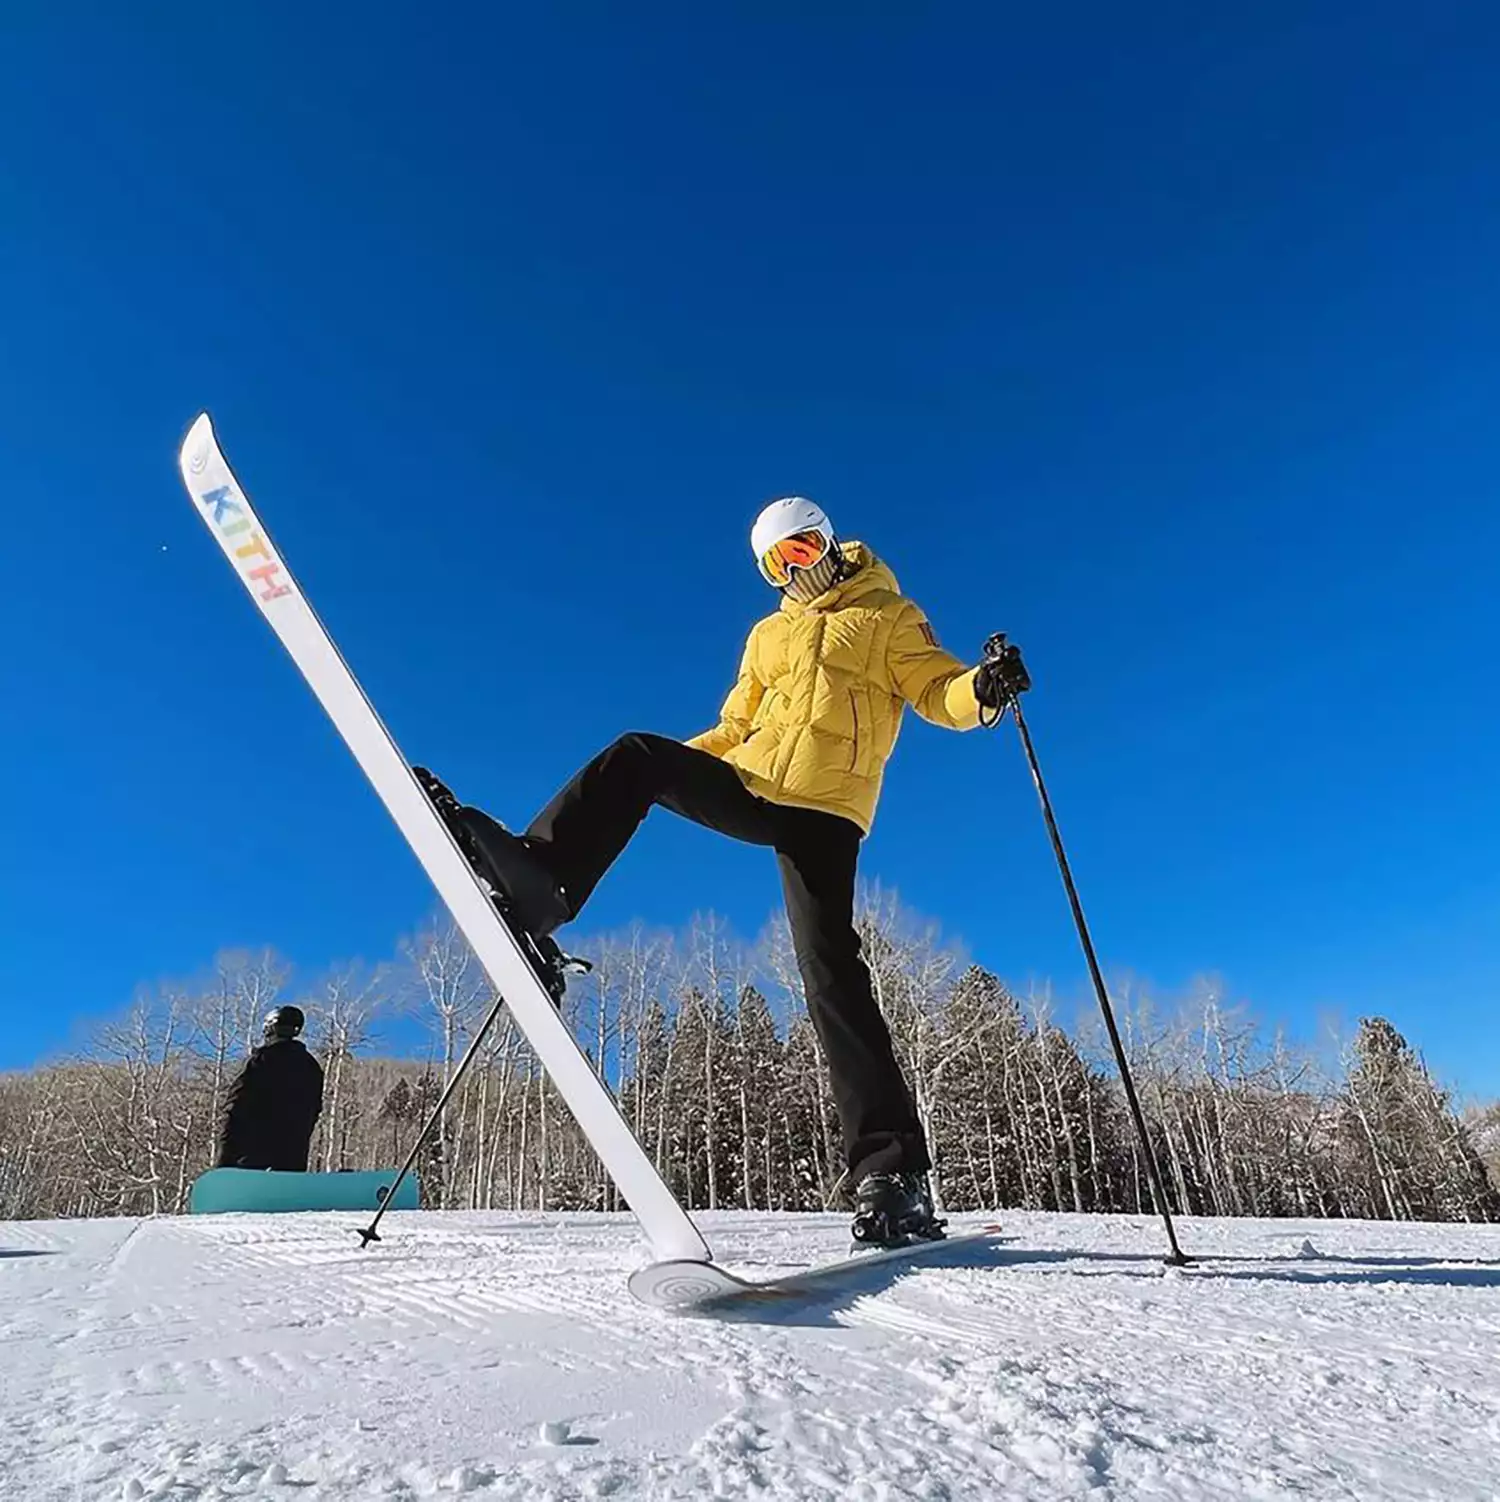 Close up of Gigi Hadid with skis, one ski in the air